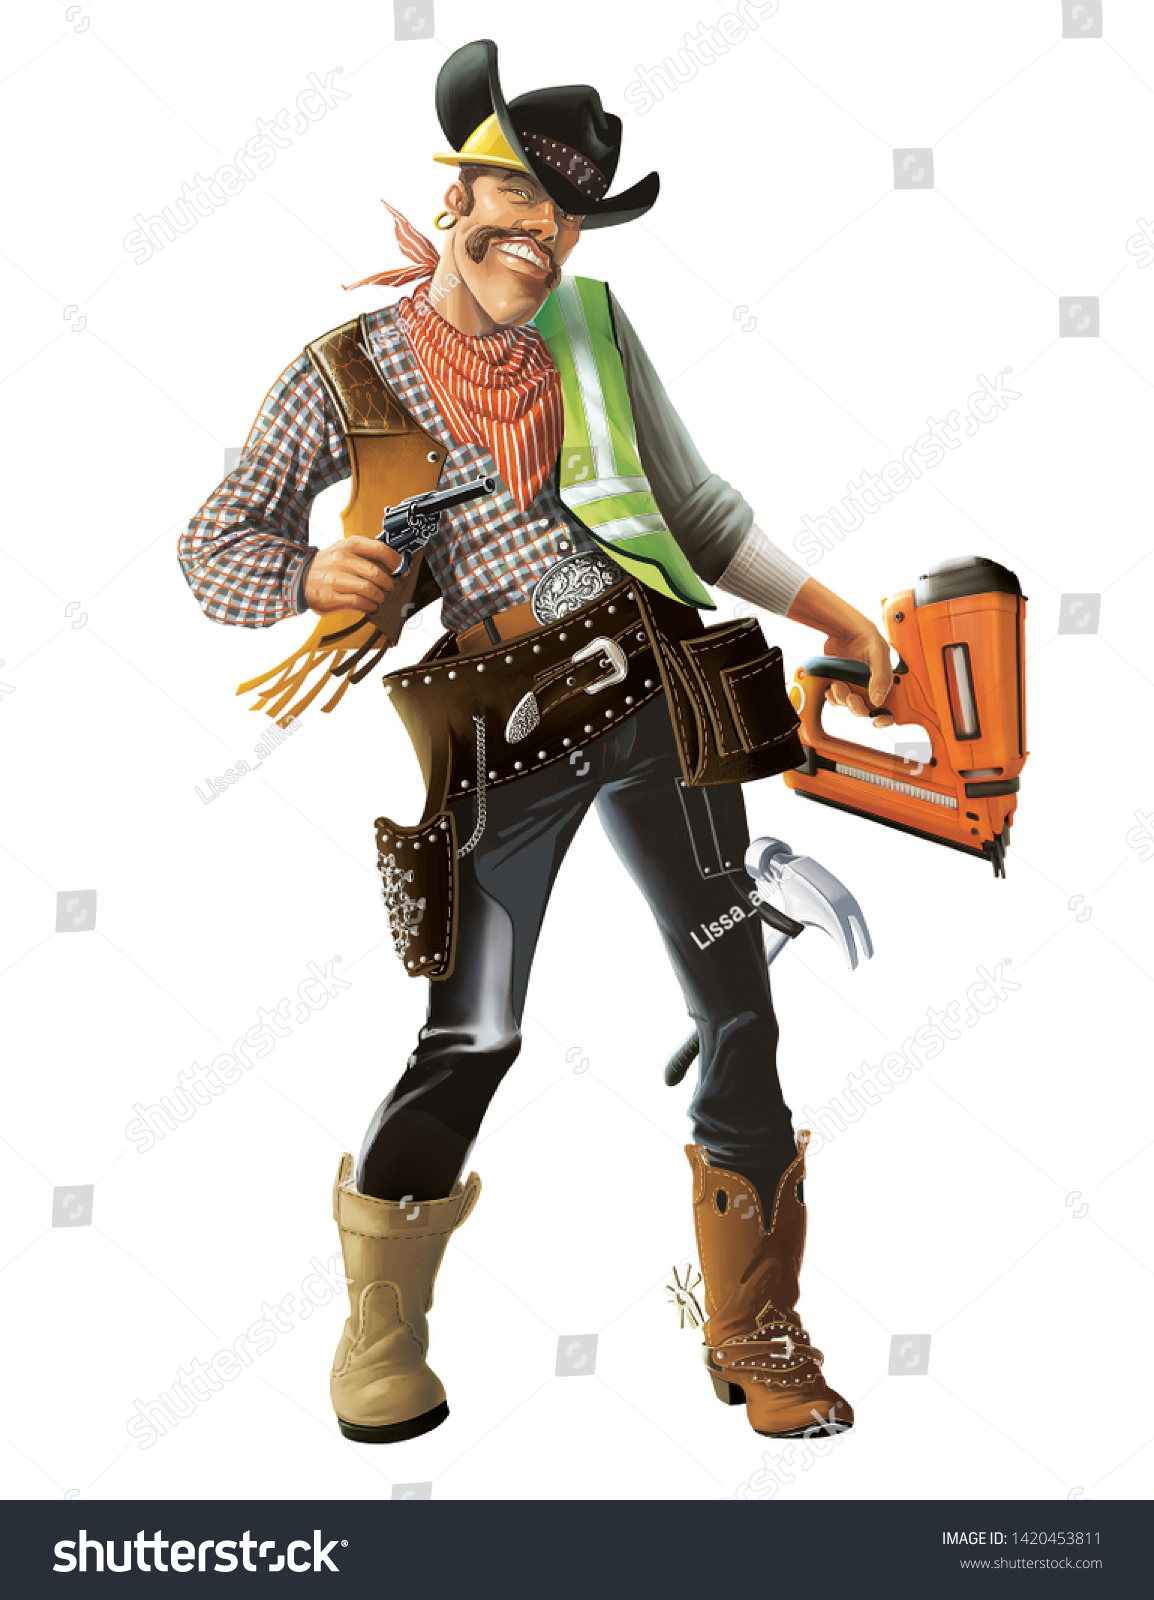 [Image: stock-photo-cowboy-builder-man-with-a-co...453811.jpg]